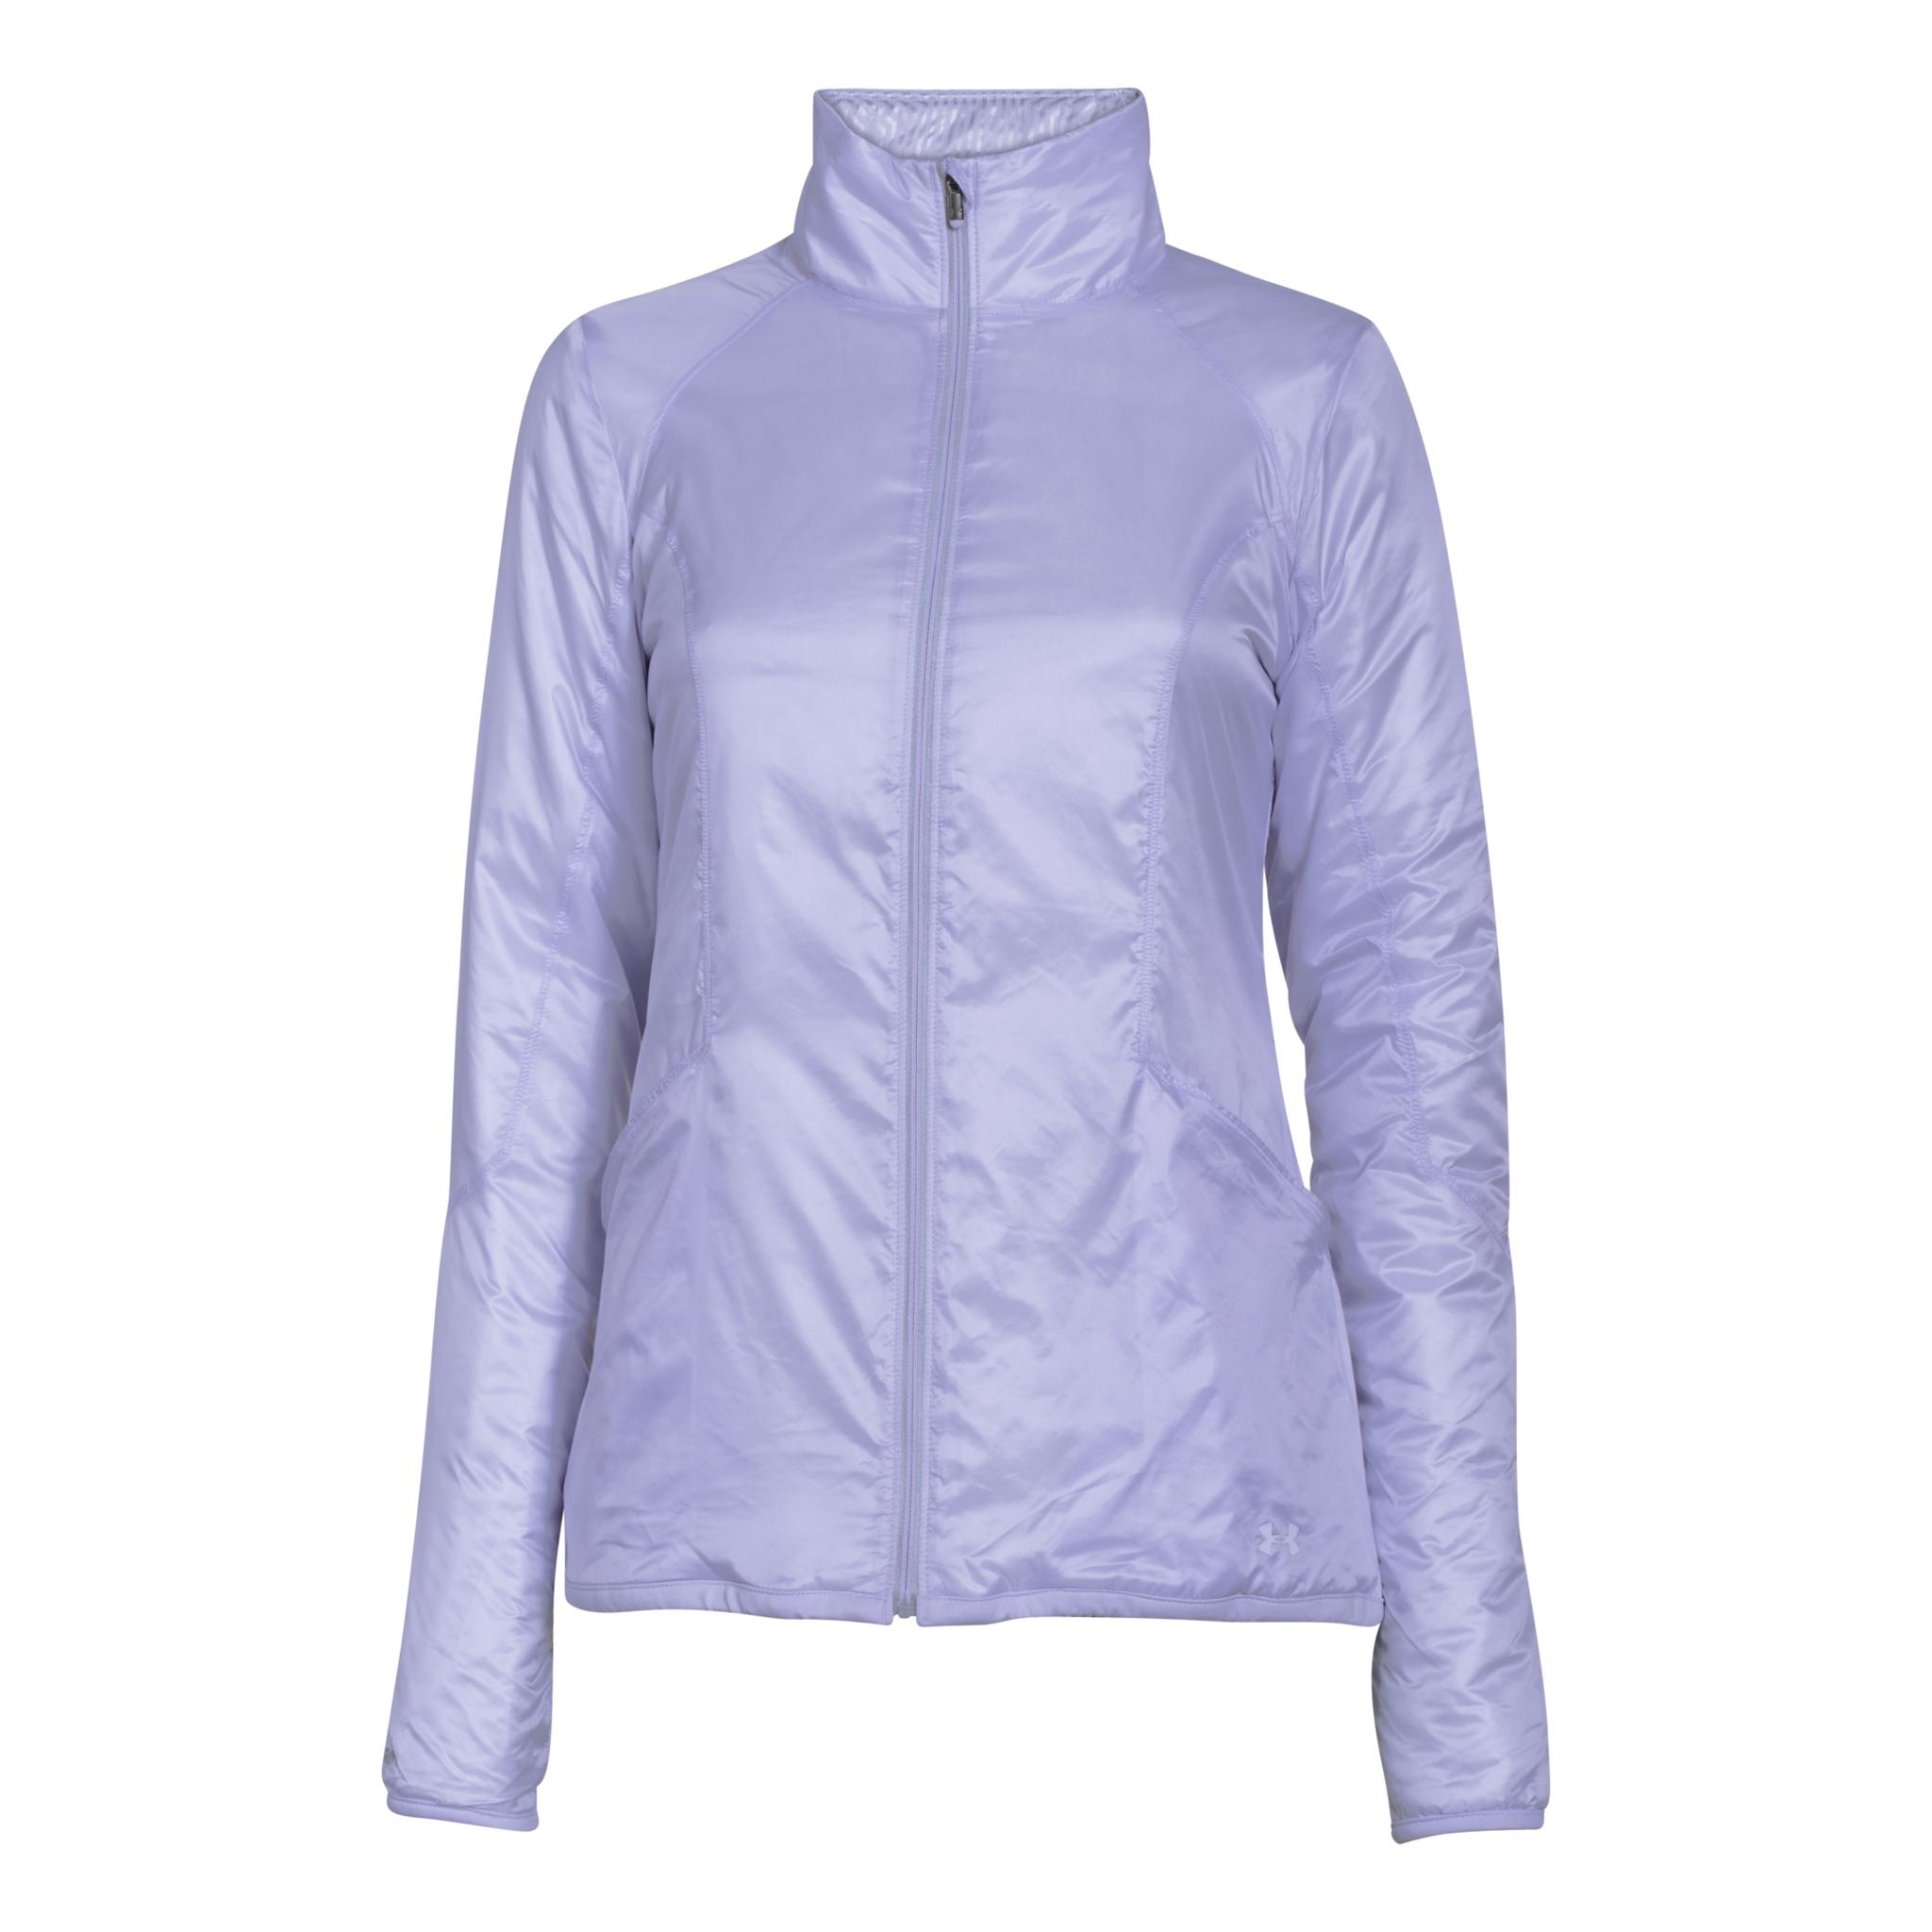 Under Armour Infrared Jacket Lilas XS 